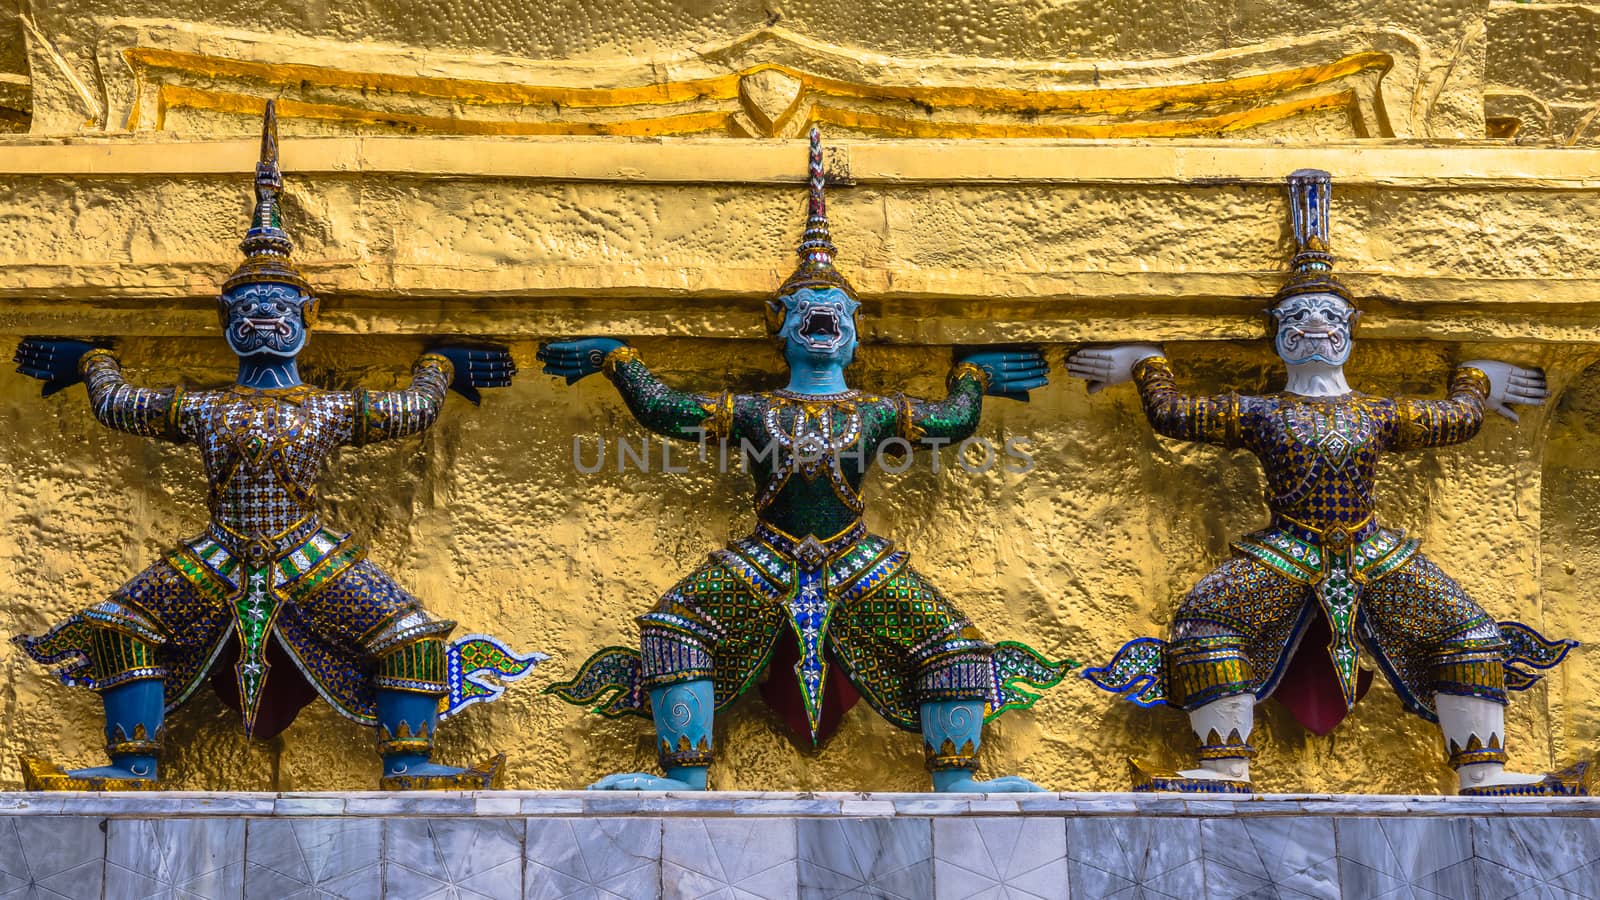 Architectural details of The Wat Phra Kaew (The Temple of the Emerald Buddha) in Bangkok, Thailand.